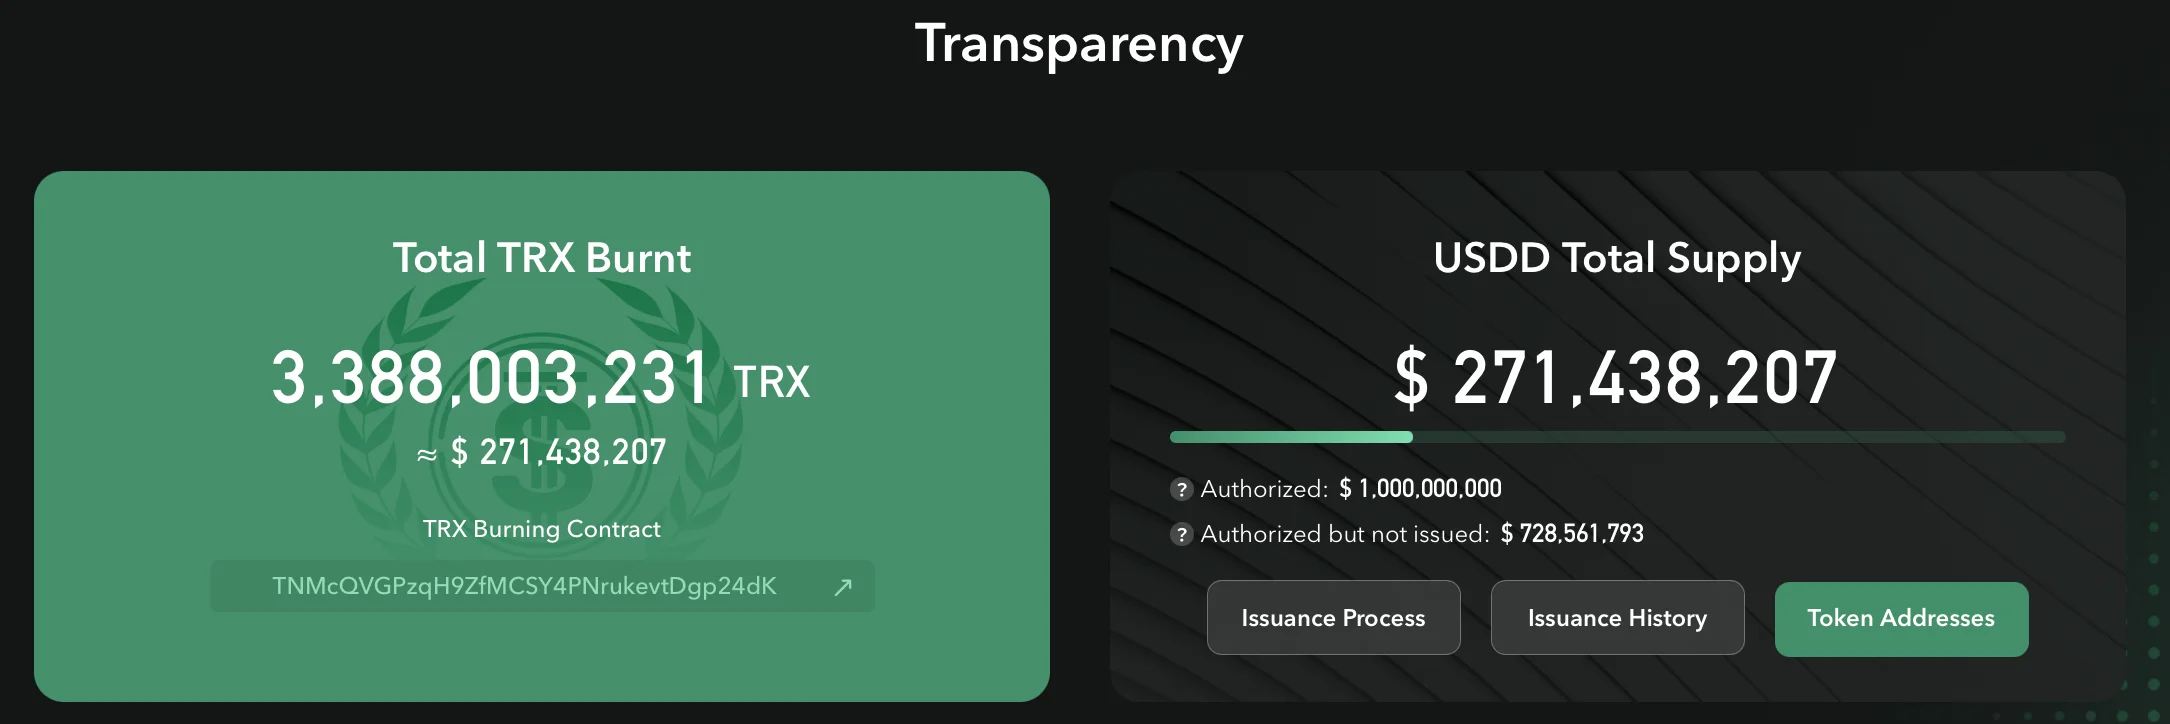 Overview of the amount of TRX burned and USDD in circulation (May 13, 2022)